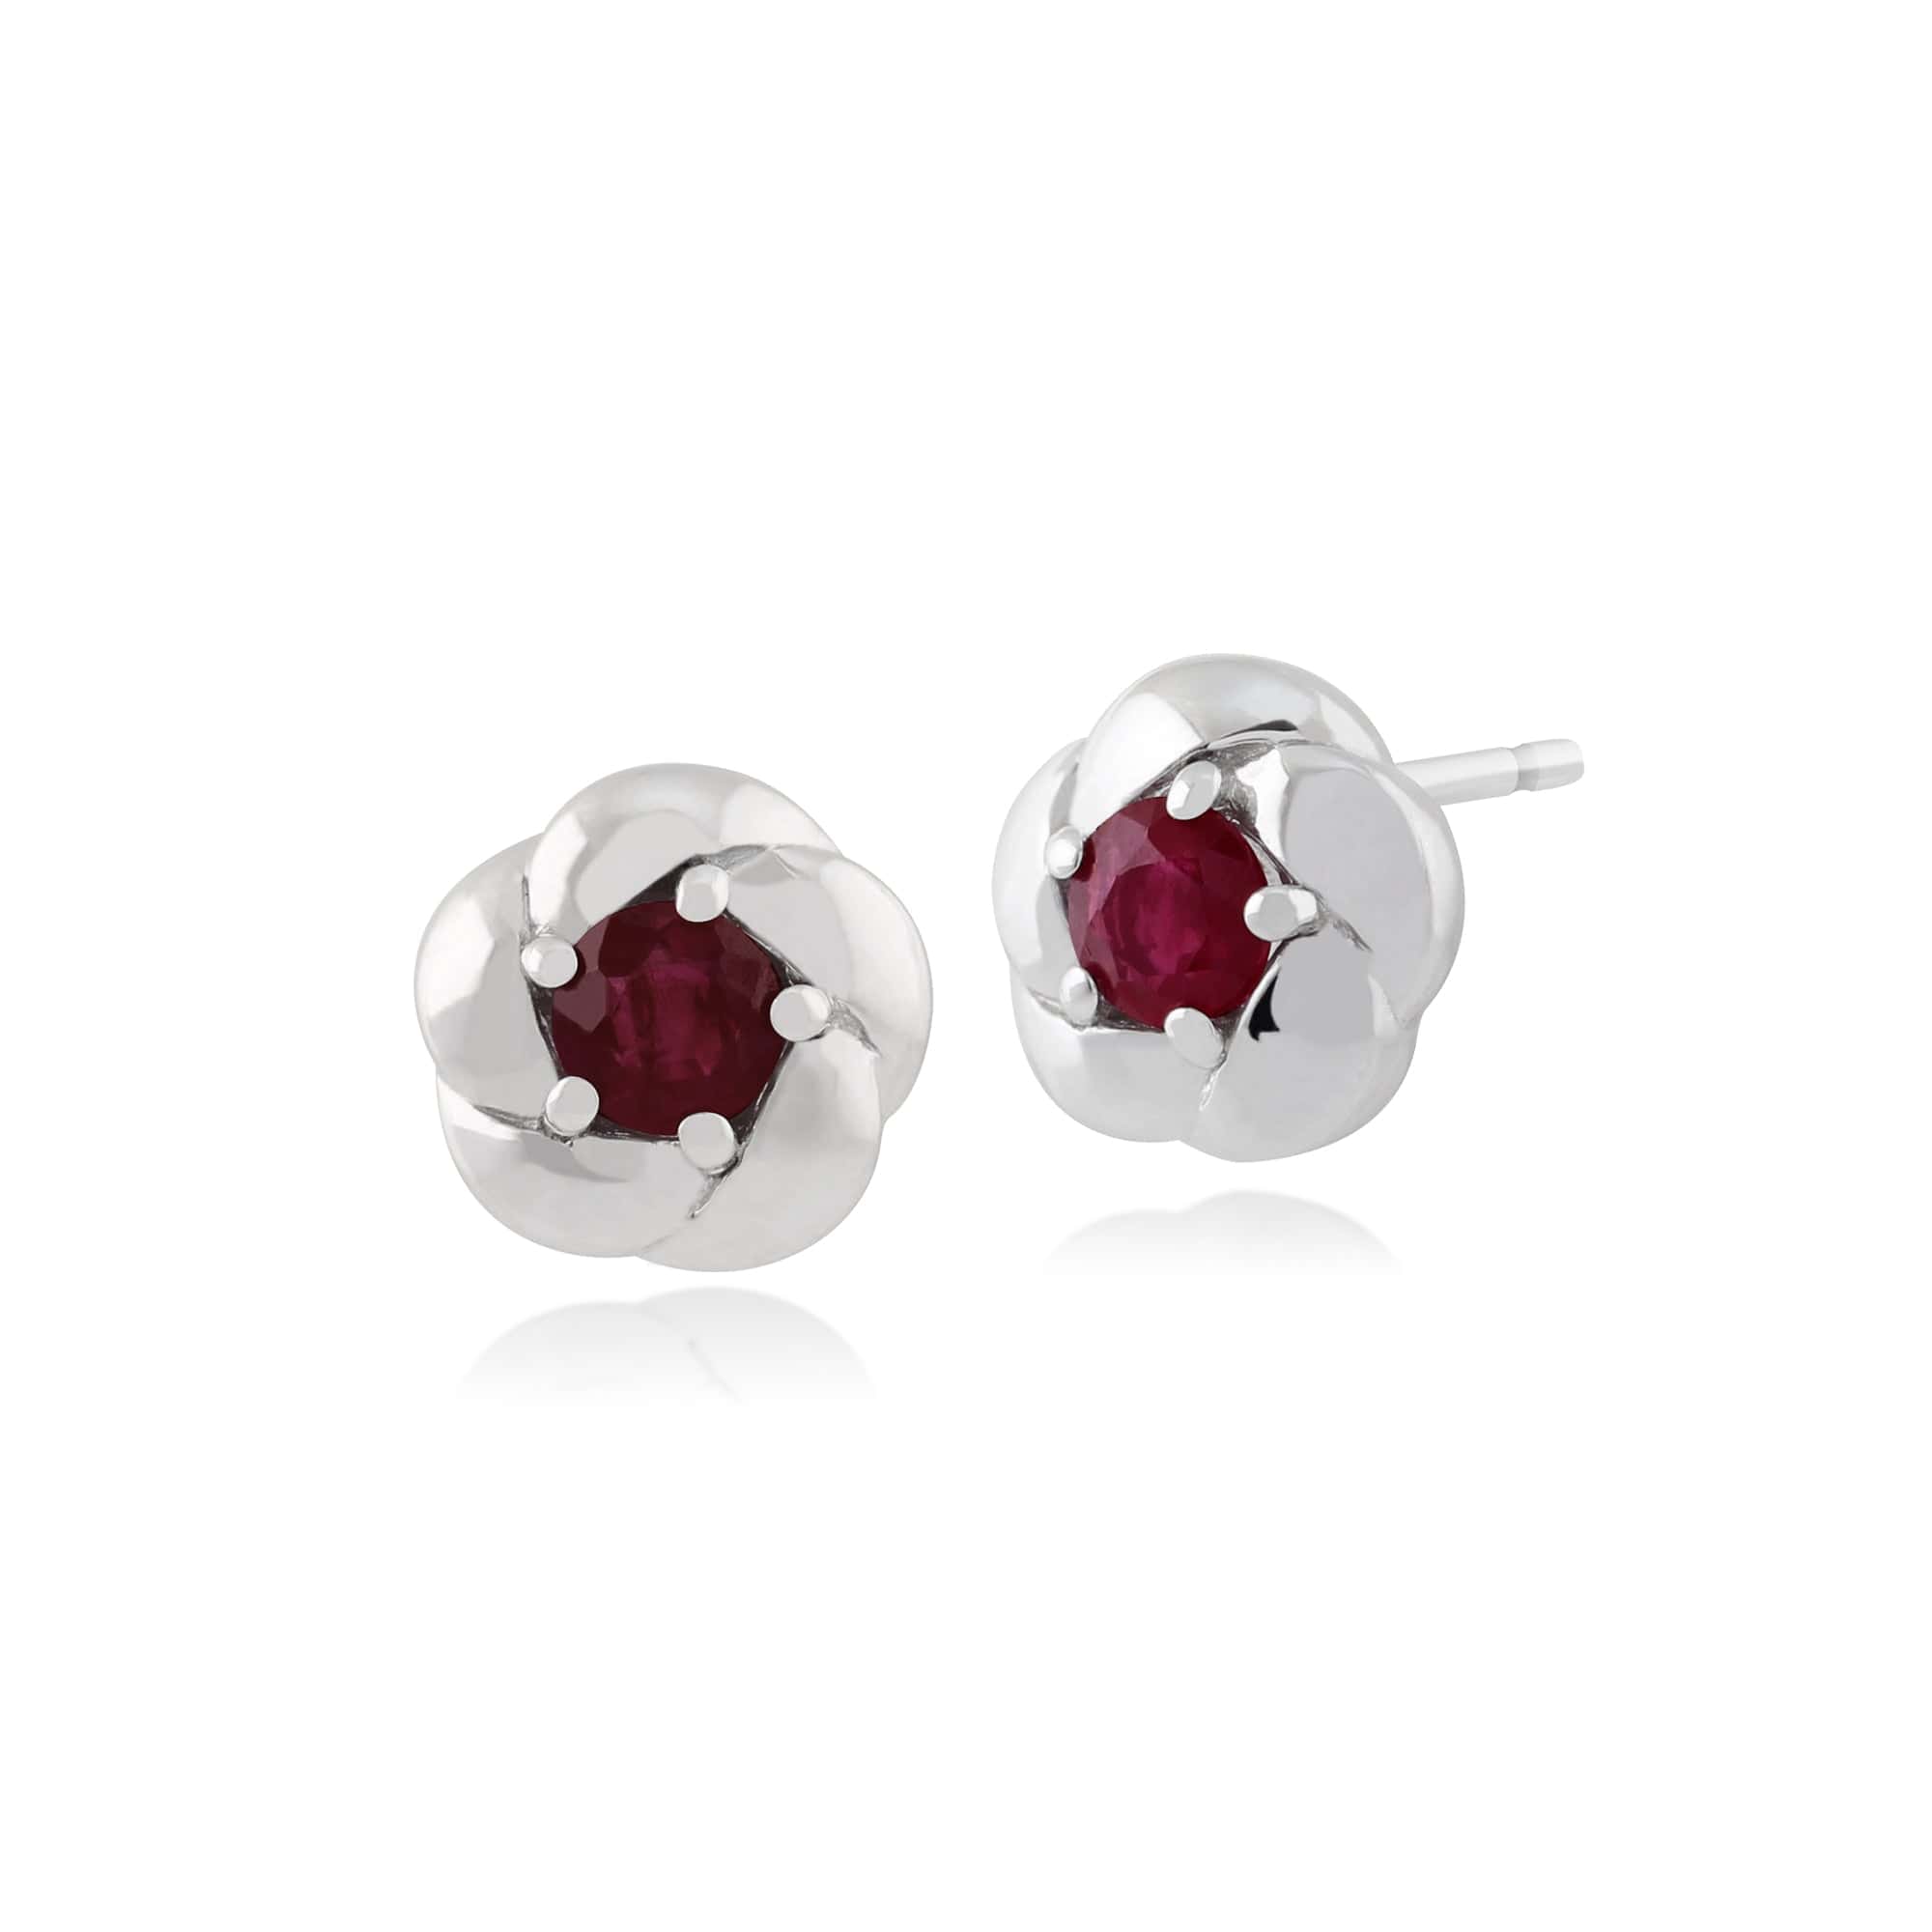 Gemondo Plaited Texture 9ct White Gold 0.28ct Ruby Stud Earrings Image